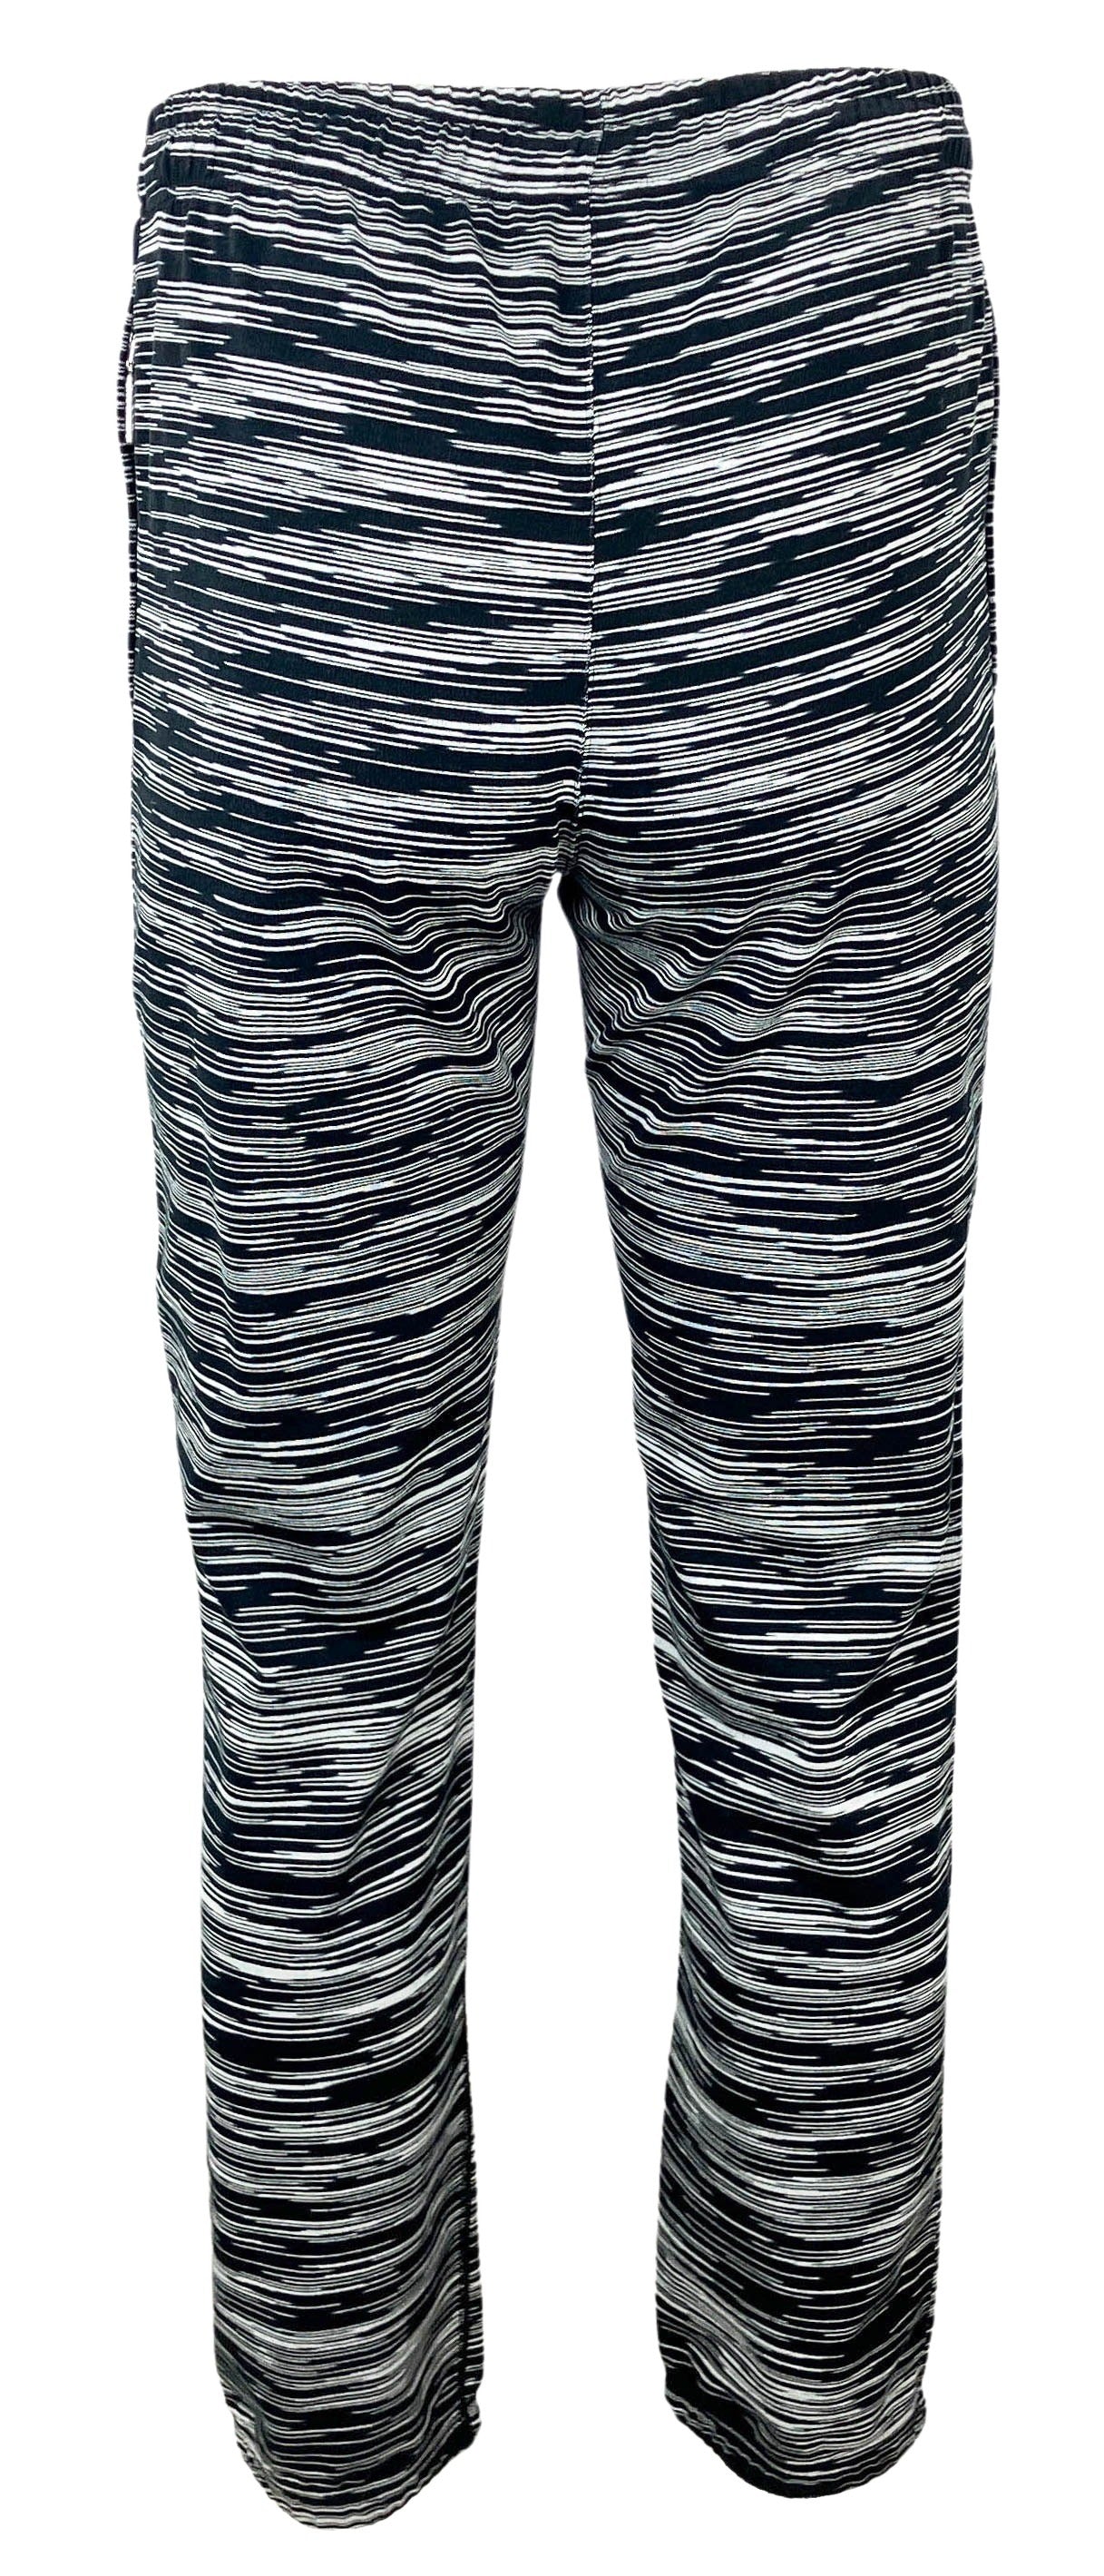 Missoni Space-Dyed Jogging Pants in Black - Discounts on Missoni at UAL